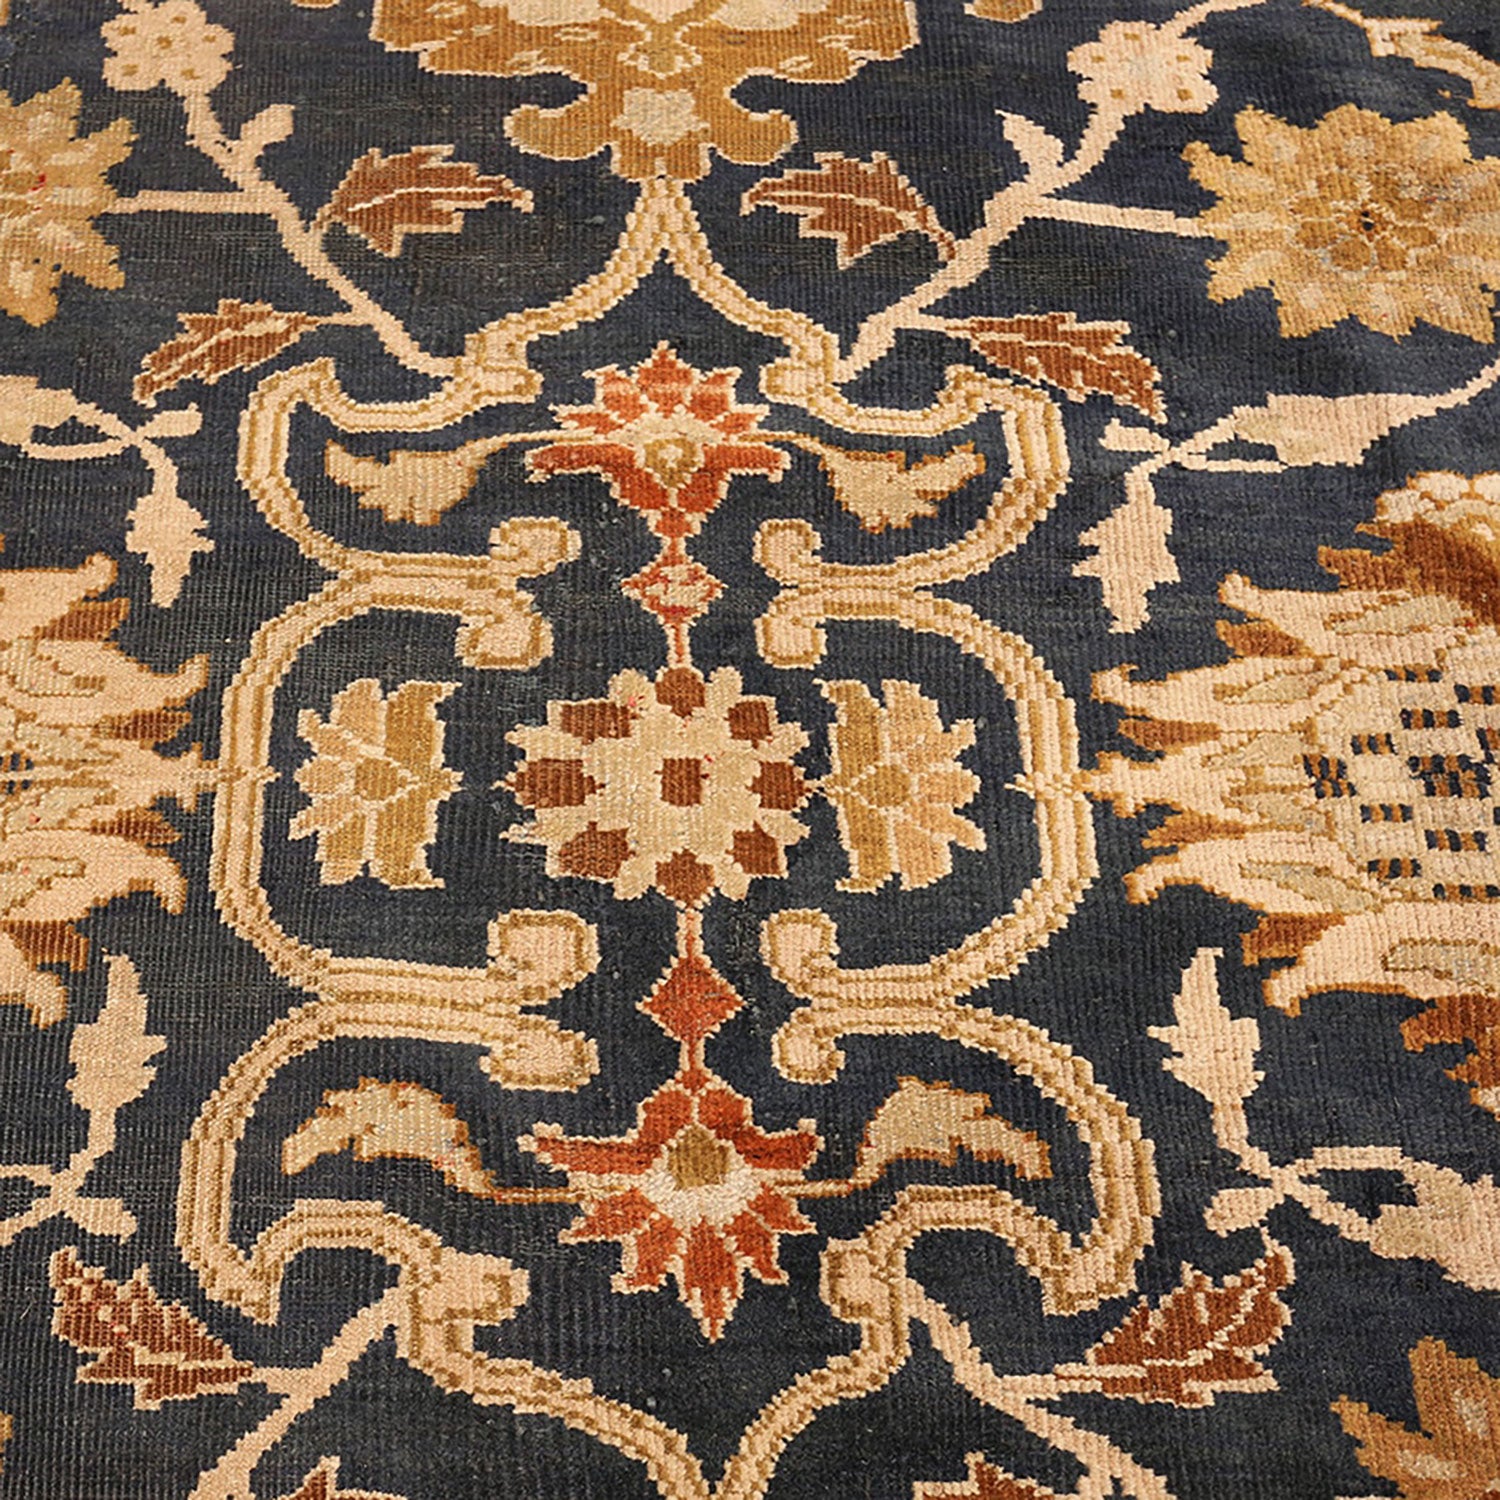 Close-up of an intricate, woven floral-patterned rug in warm tones.